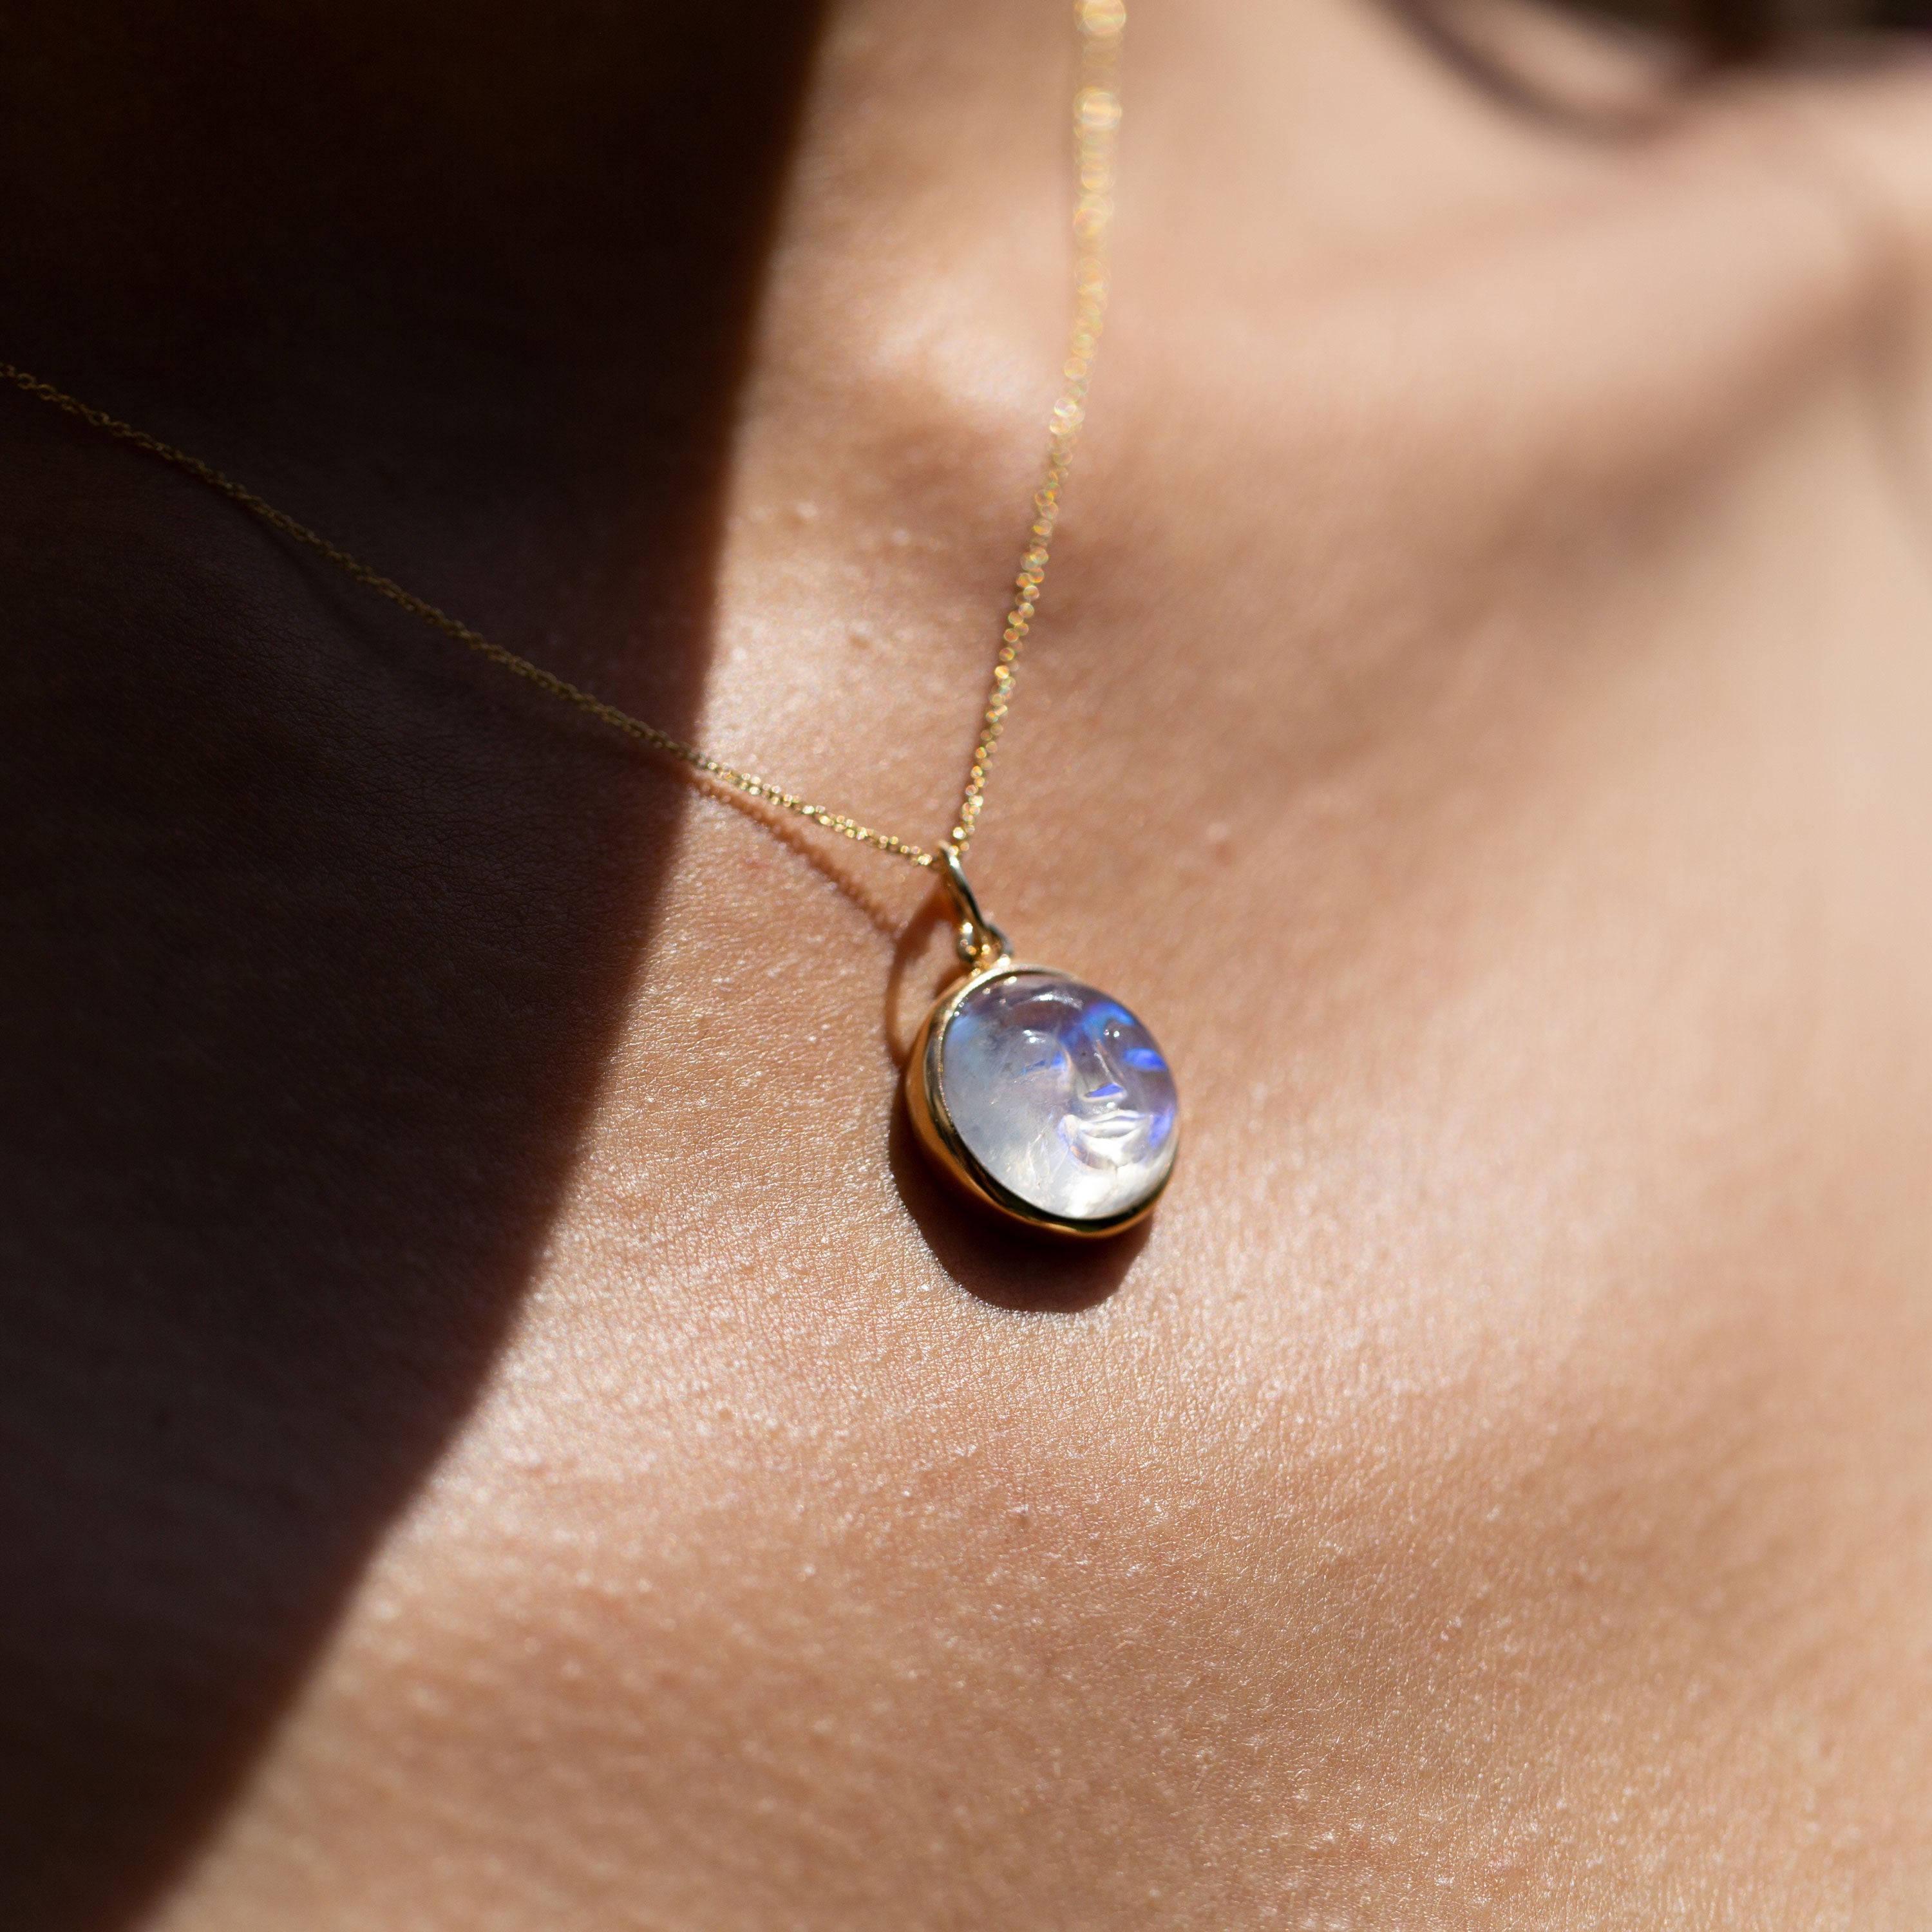 The F&B Man-In-The-Moon Moonstone Charm